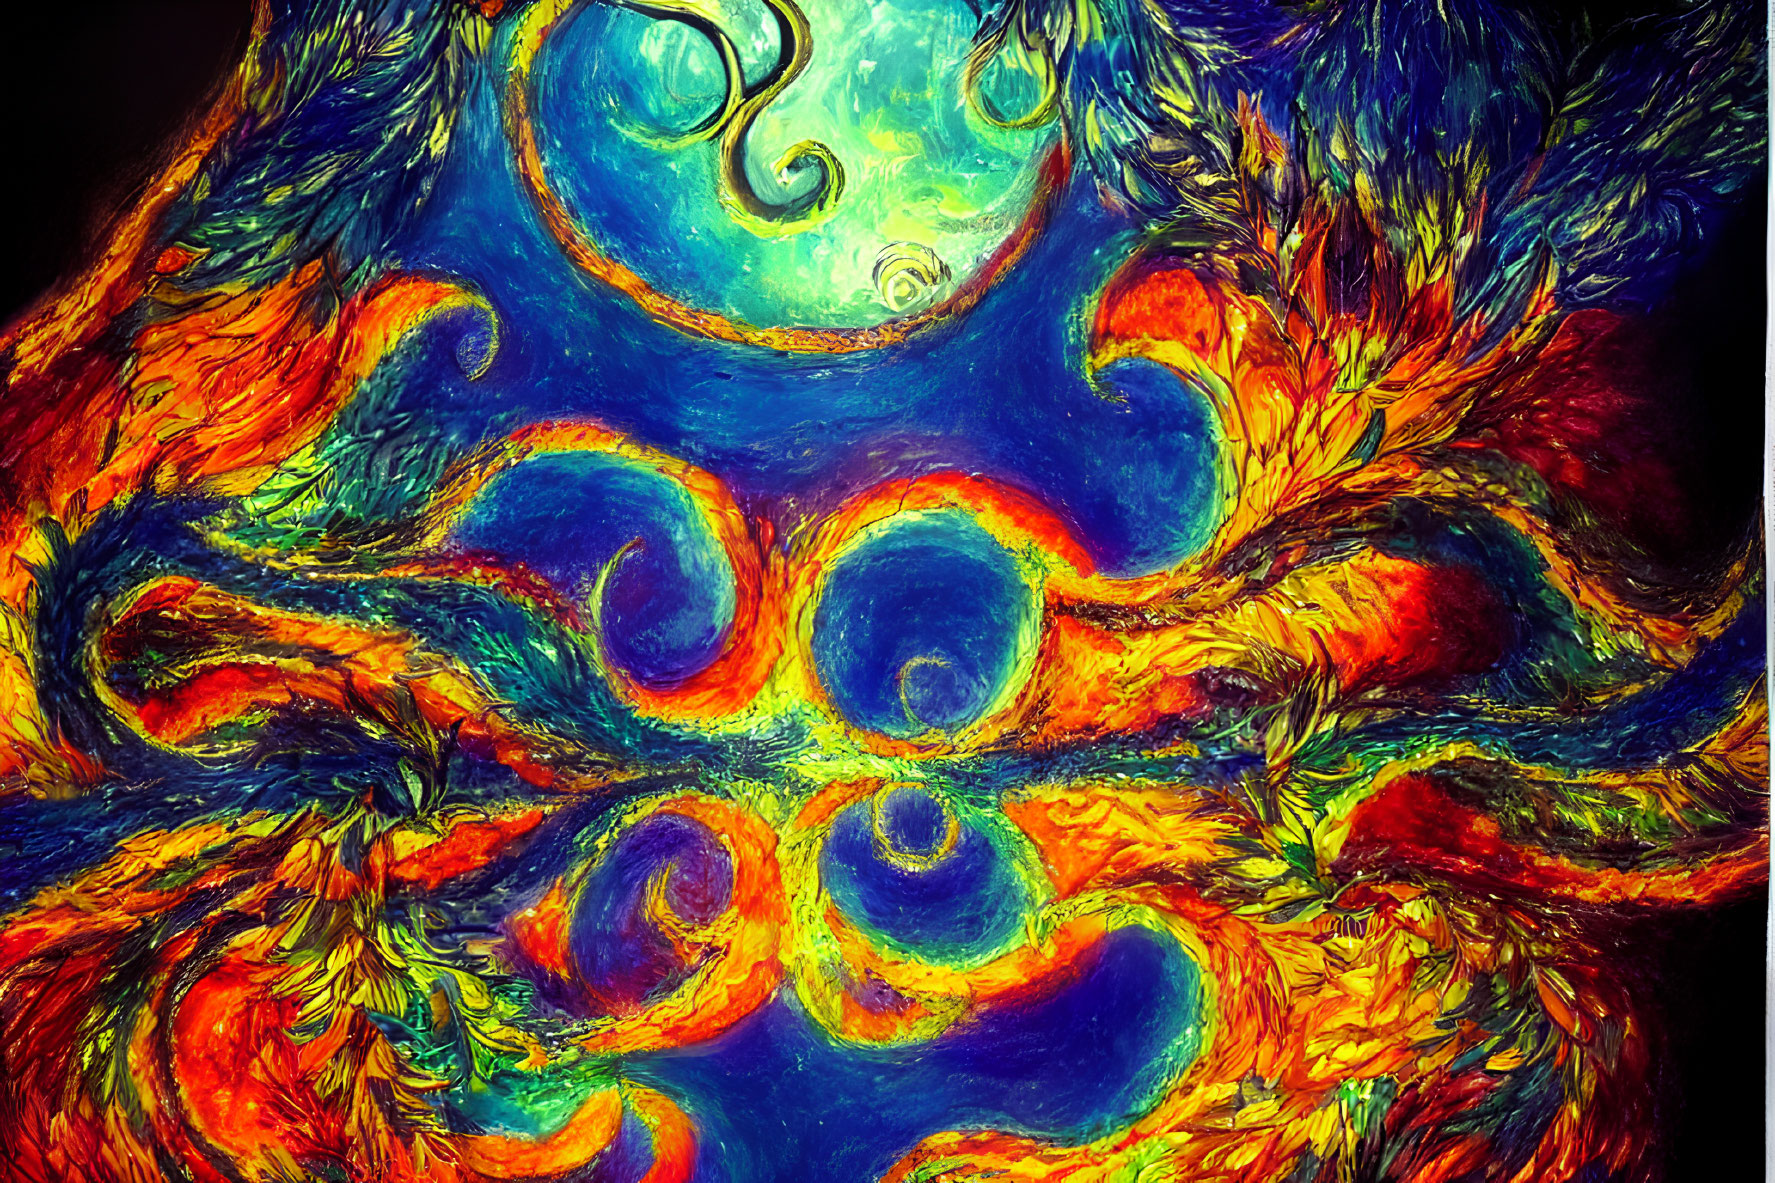 Vibrant Abstract Fractal Art: Blue, Orange, and Yellow Swirls with Teal